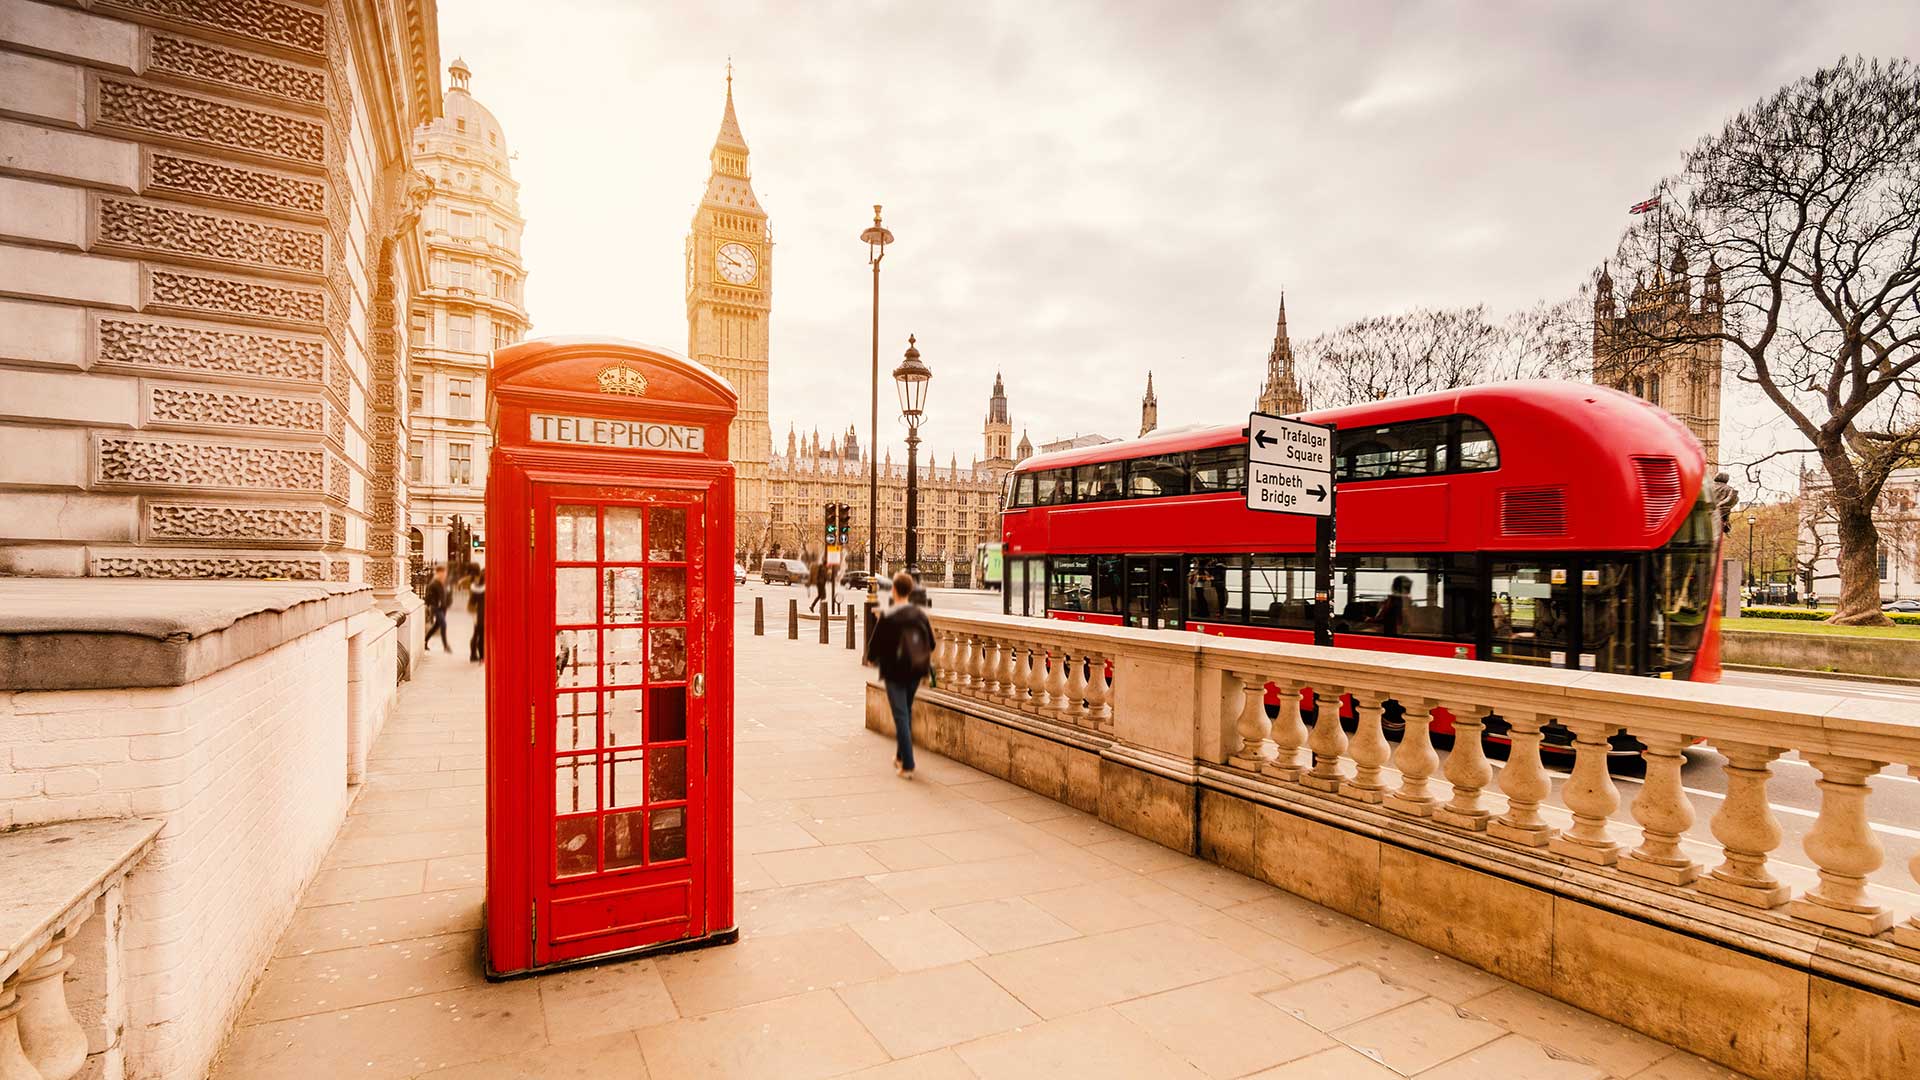 London’s calling – but will corporates listen?